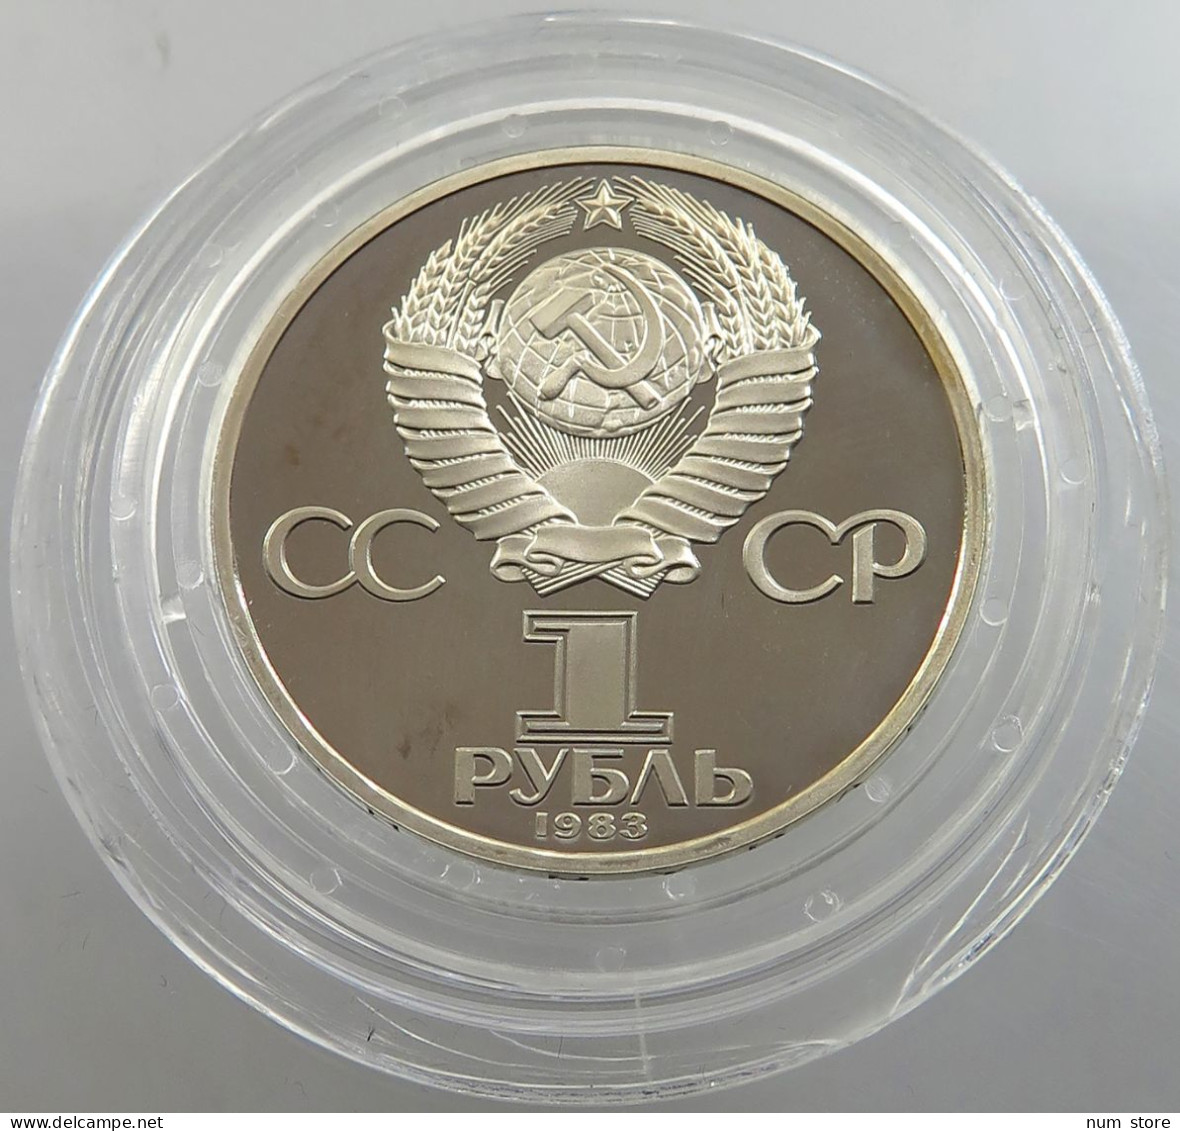 RUSSIA USSR 1 ROUBLE 1983 WITHOUT 1988 ON EDGE MARX PROOF #sm14 0335 - Rusia